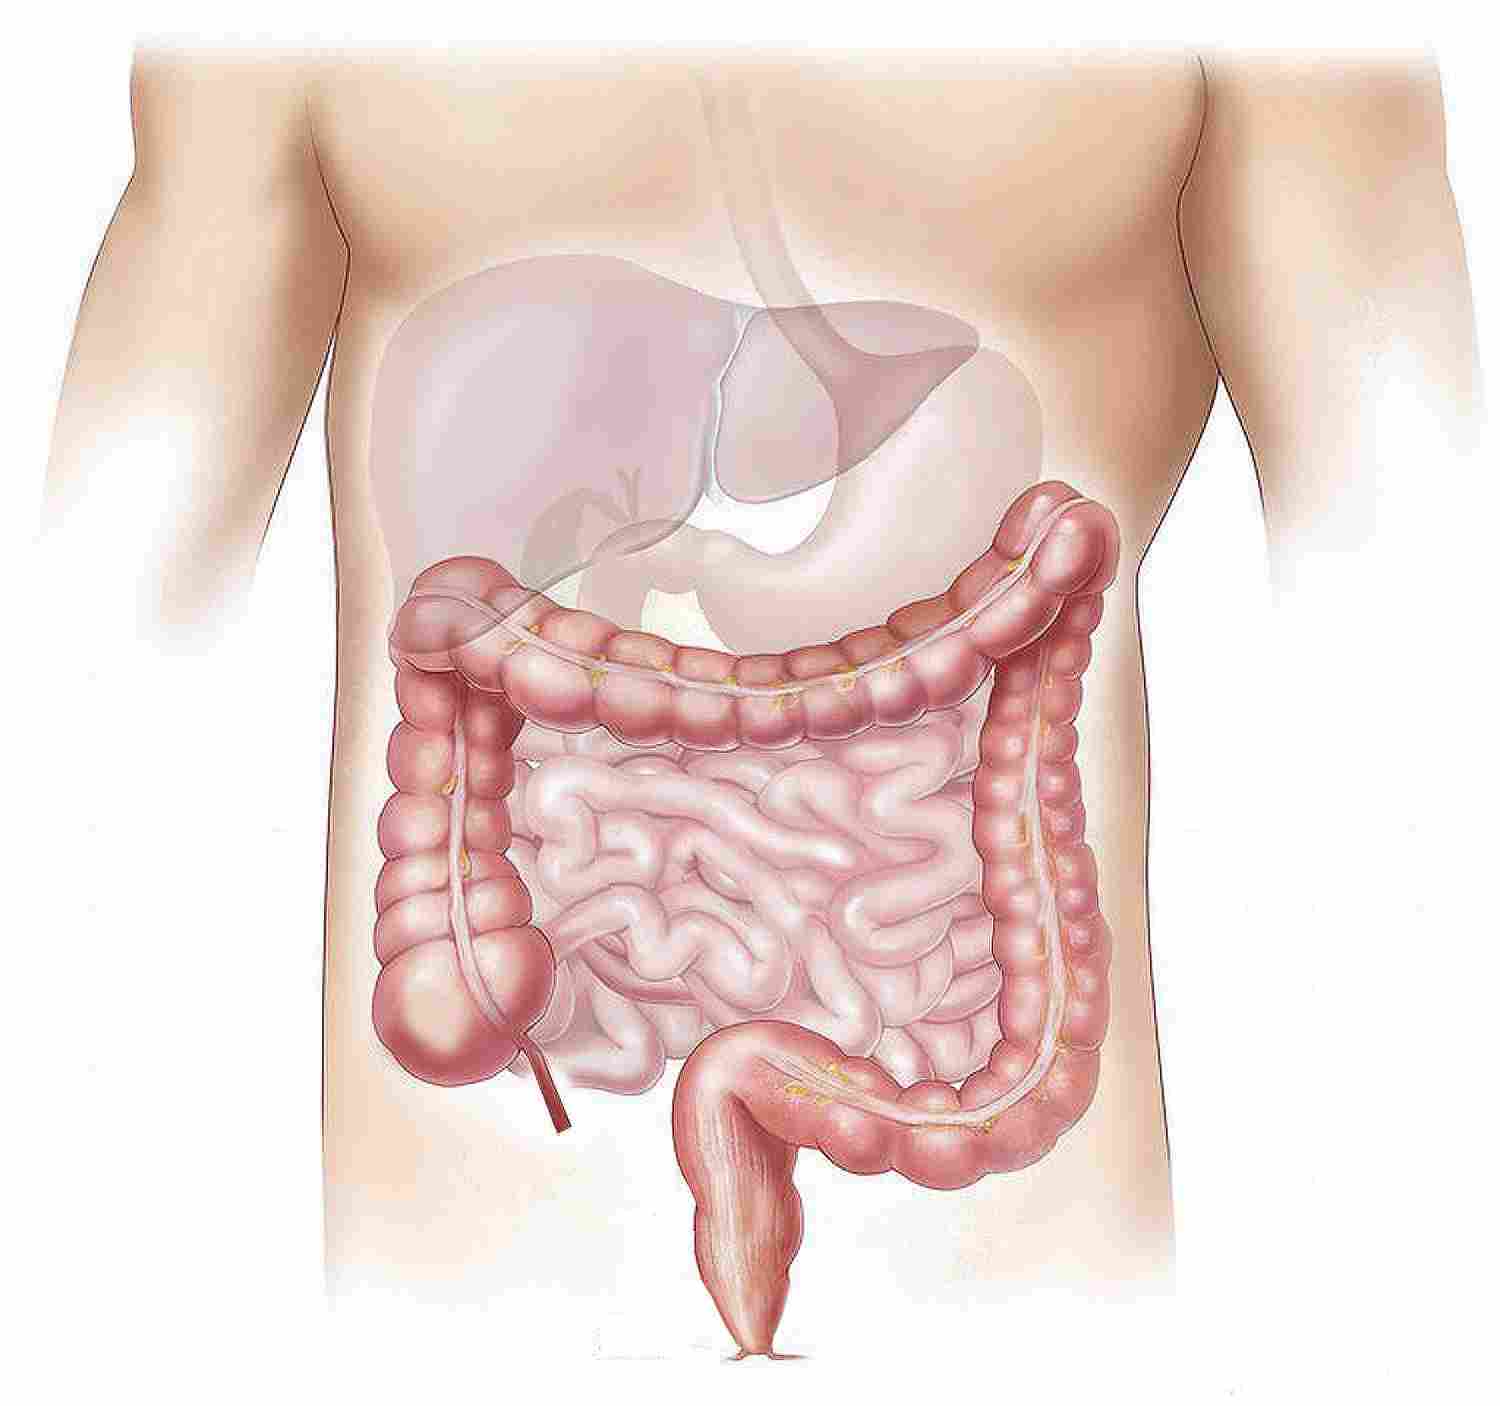 Hydrogen peroxide keeps gut bacteria away from the colon lining